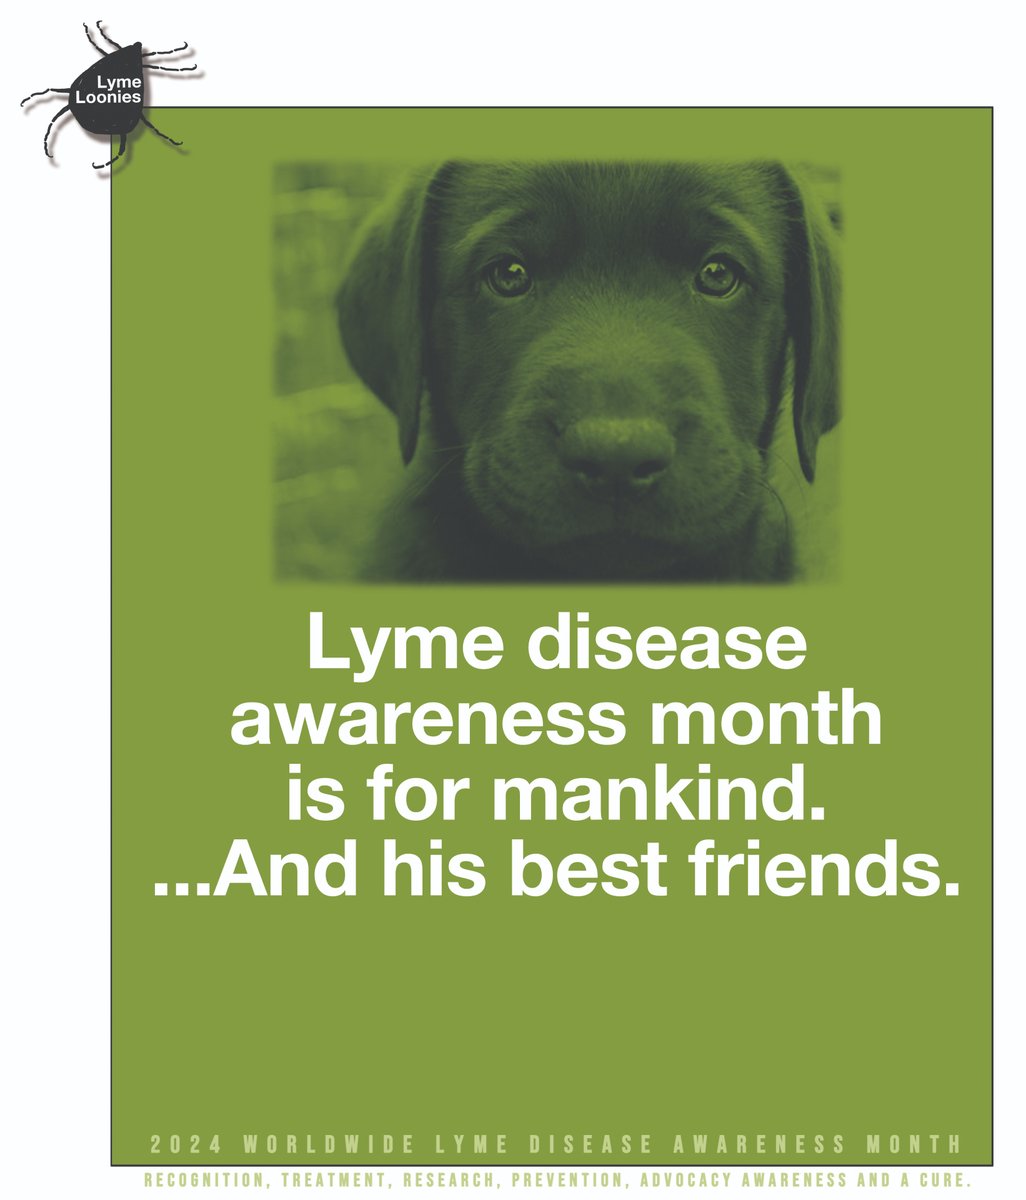 During #LymeDiseaseAwarenessMonth it goes without saying we can't forget about these guy's!

#LymeDisease #pets #dogs #CatsLover #animallover